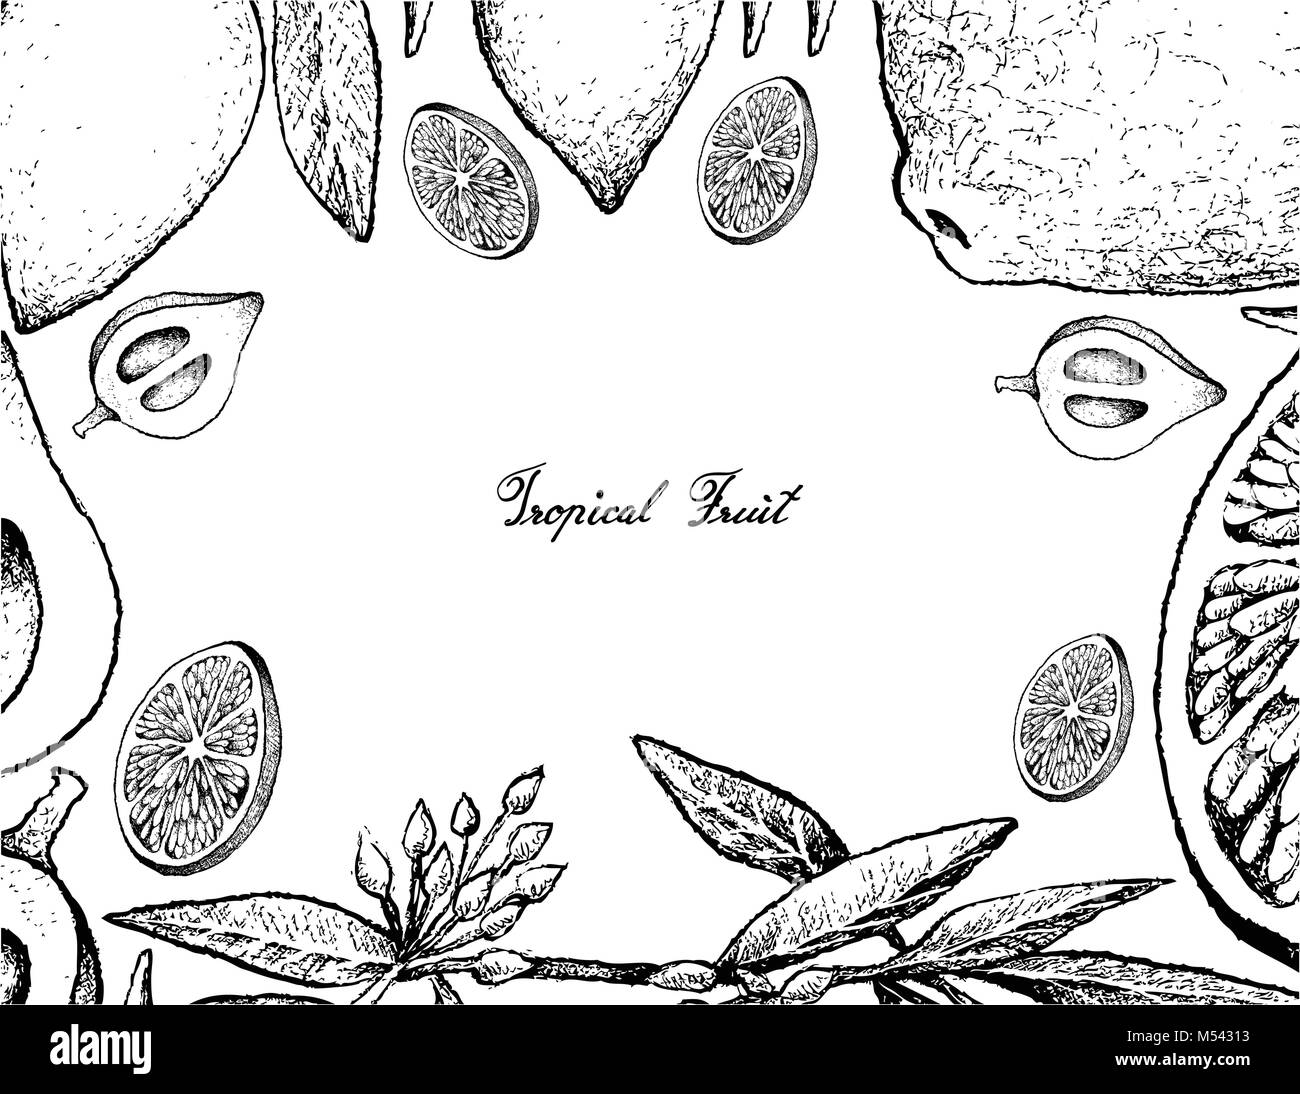 Tropical Fruits, Illustration Frame of Hand Drawn Sketch Fresh and Ripe Limes with Canistel, Sapote or Eggfruit Isolated on White Background. Stock Vector